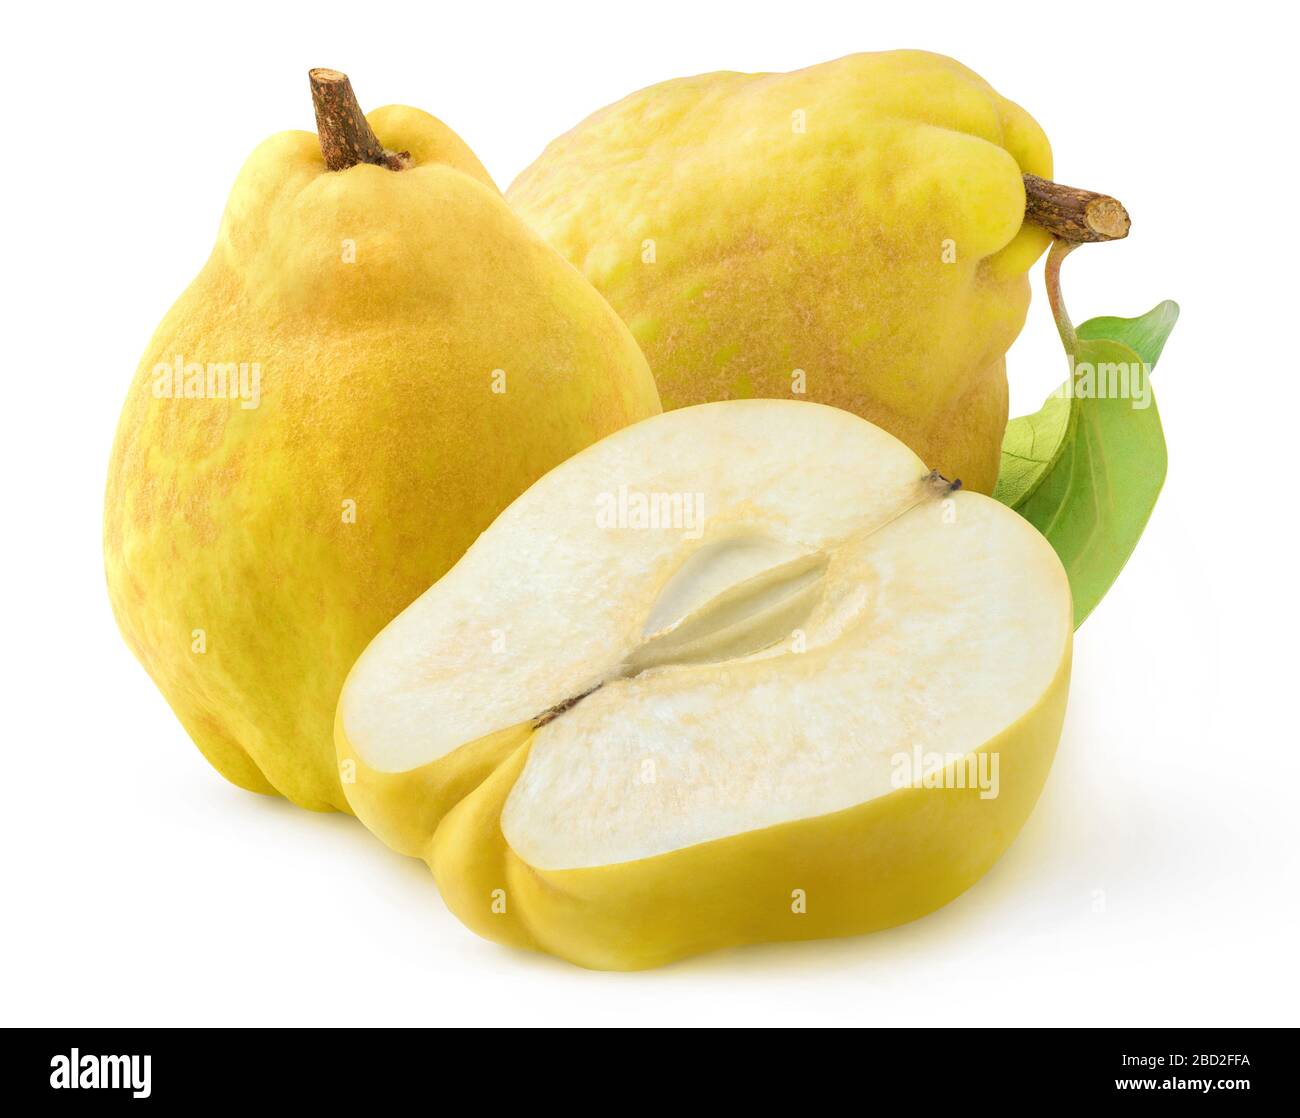 Isolated quince. Two whole quince fruits with leaves and a half isolated on white background Stock Photo